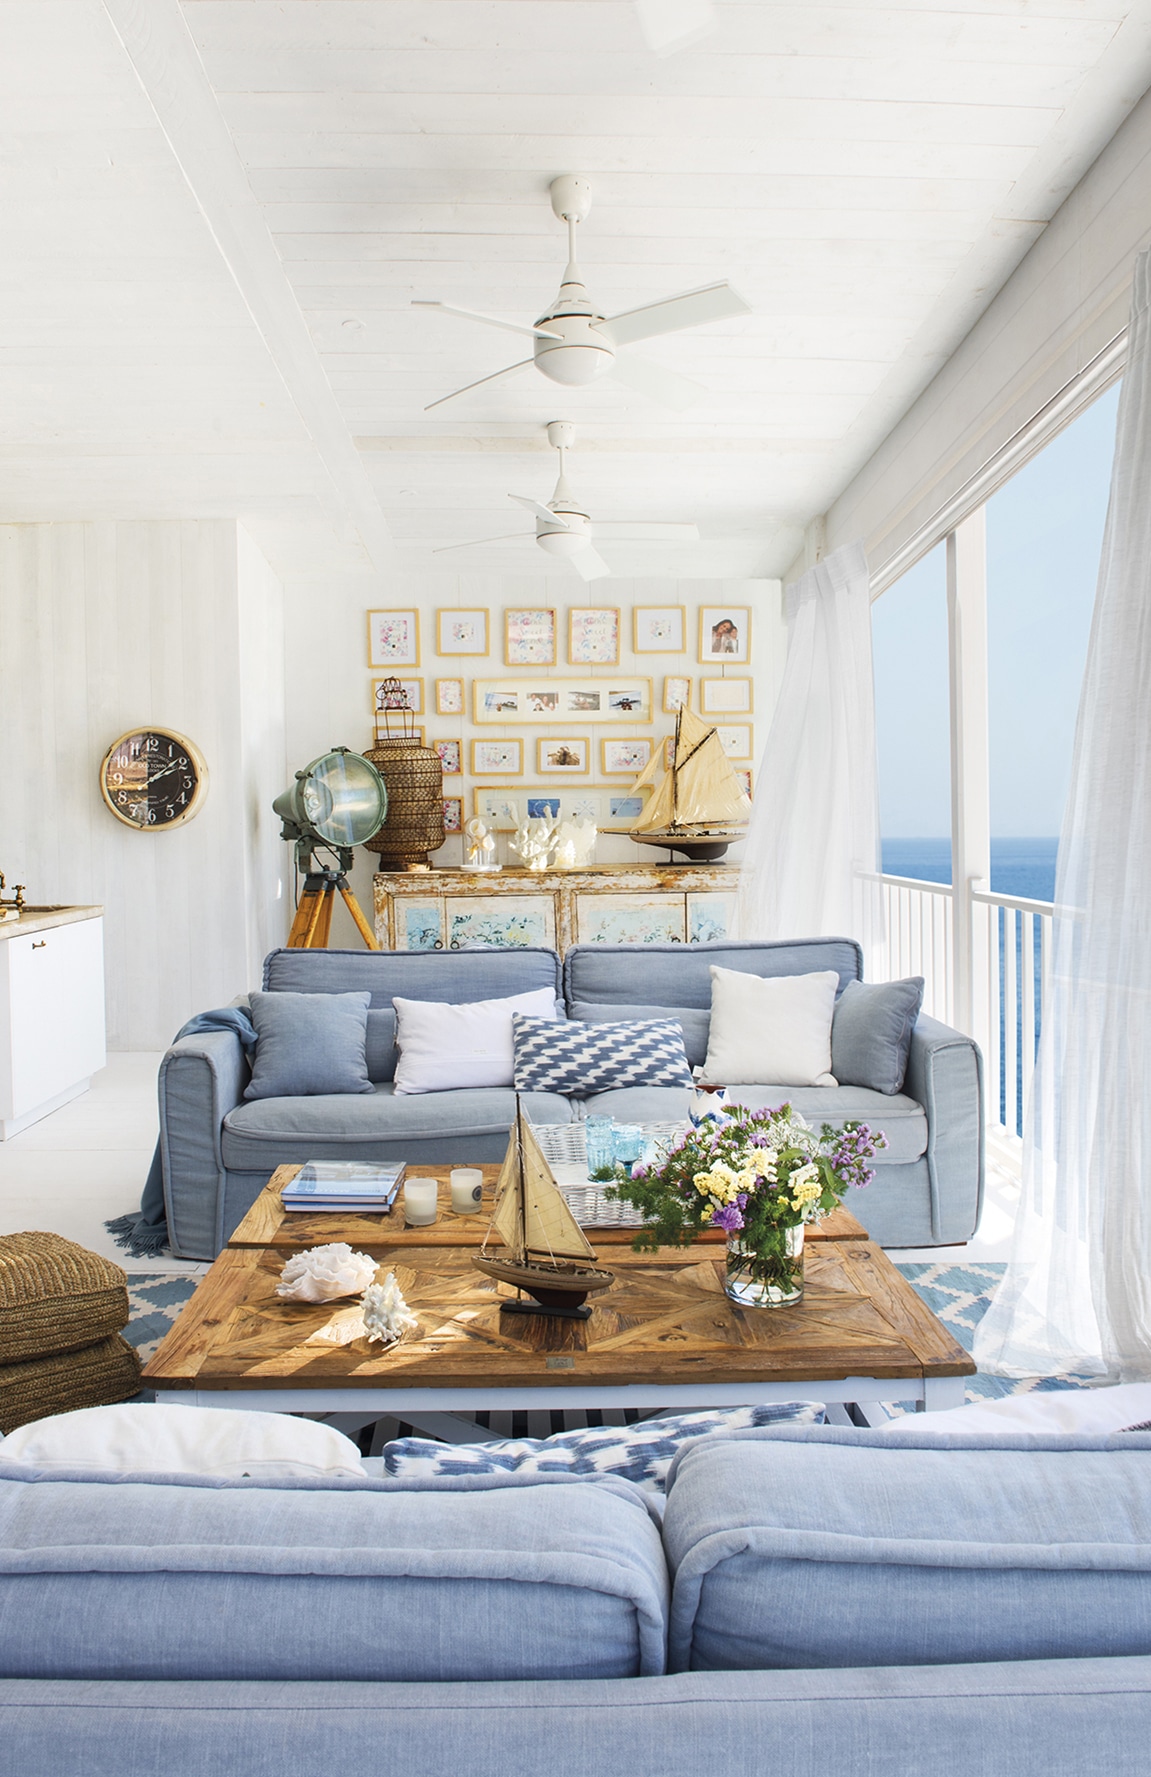 soft island blues in this idyllic beach house | home tour on coco kelley